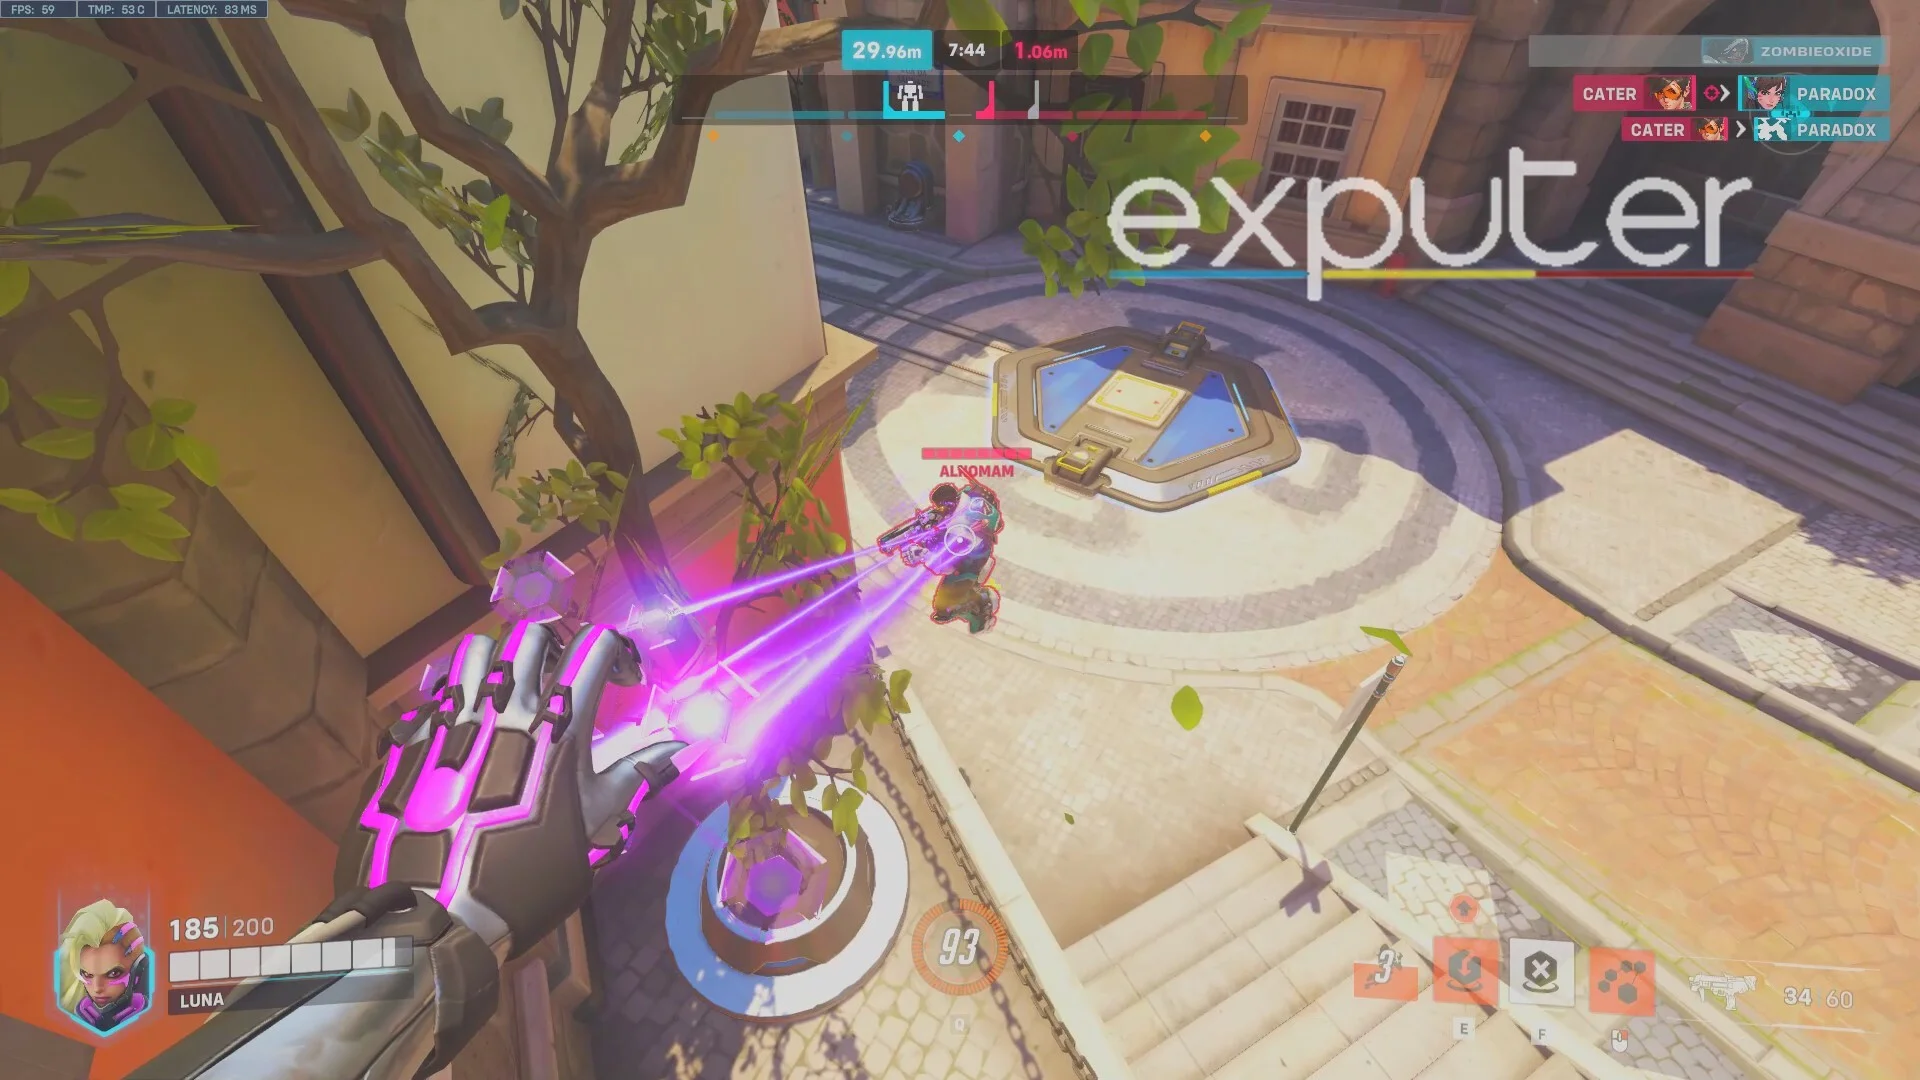 sombra exploit on rialto cost us 2 minutes before we lost the match :  r/Overwatch